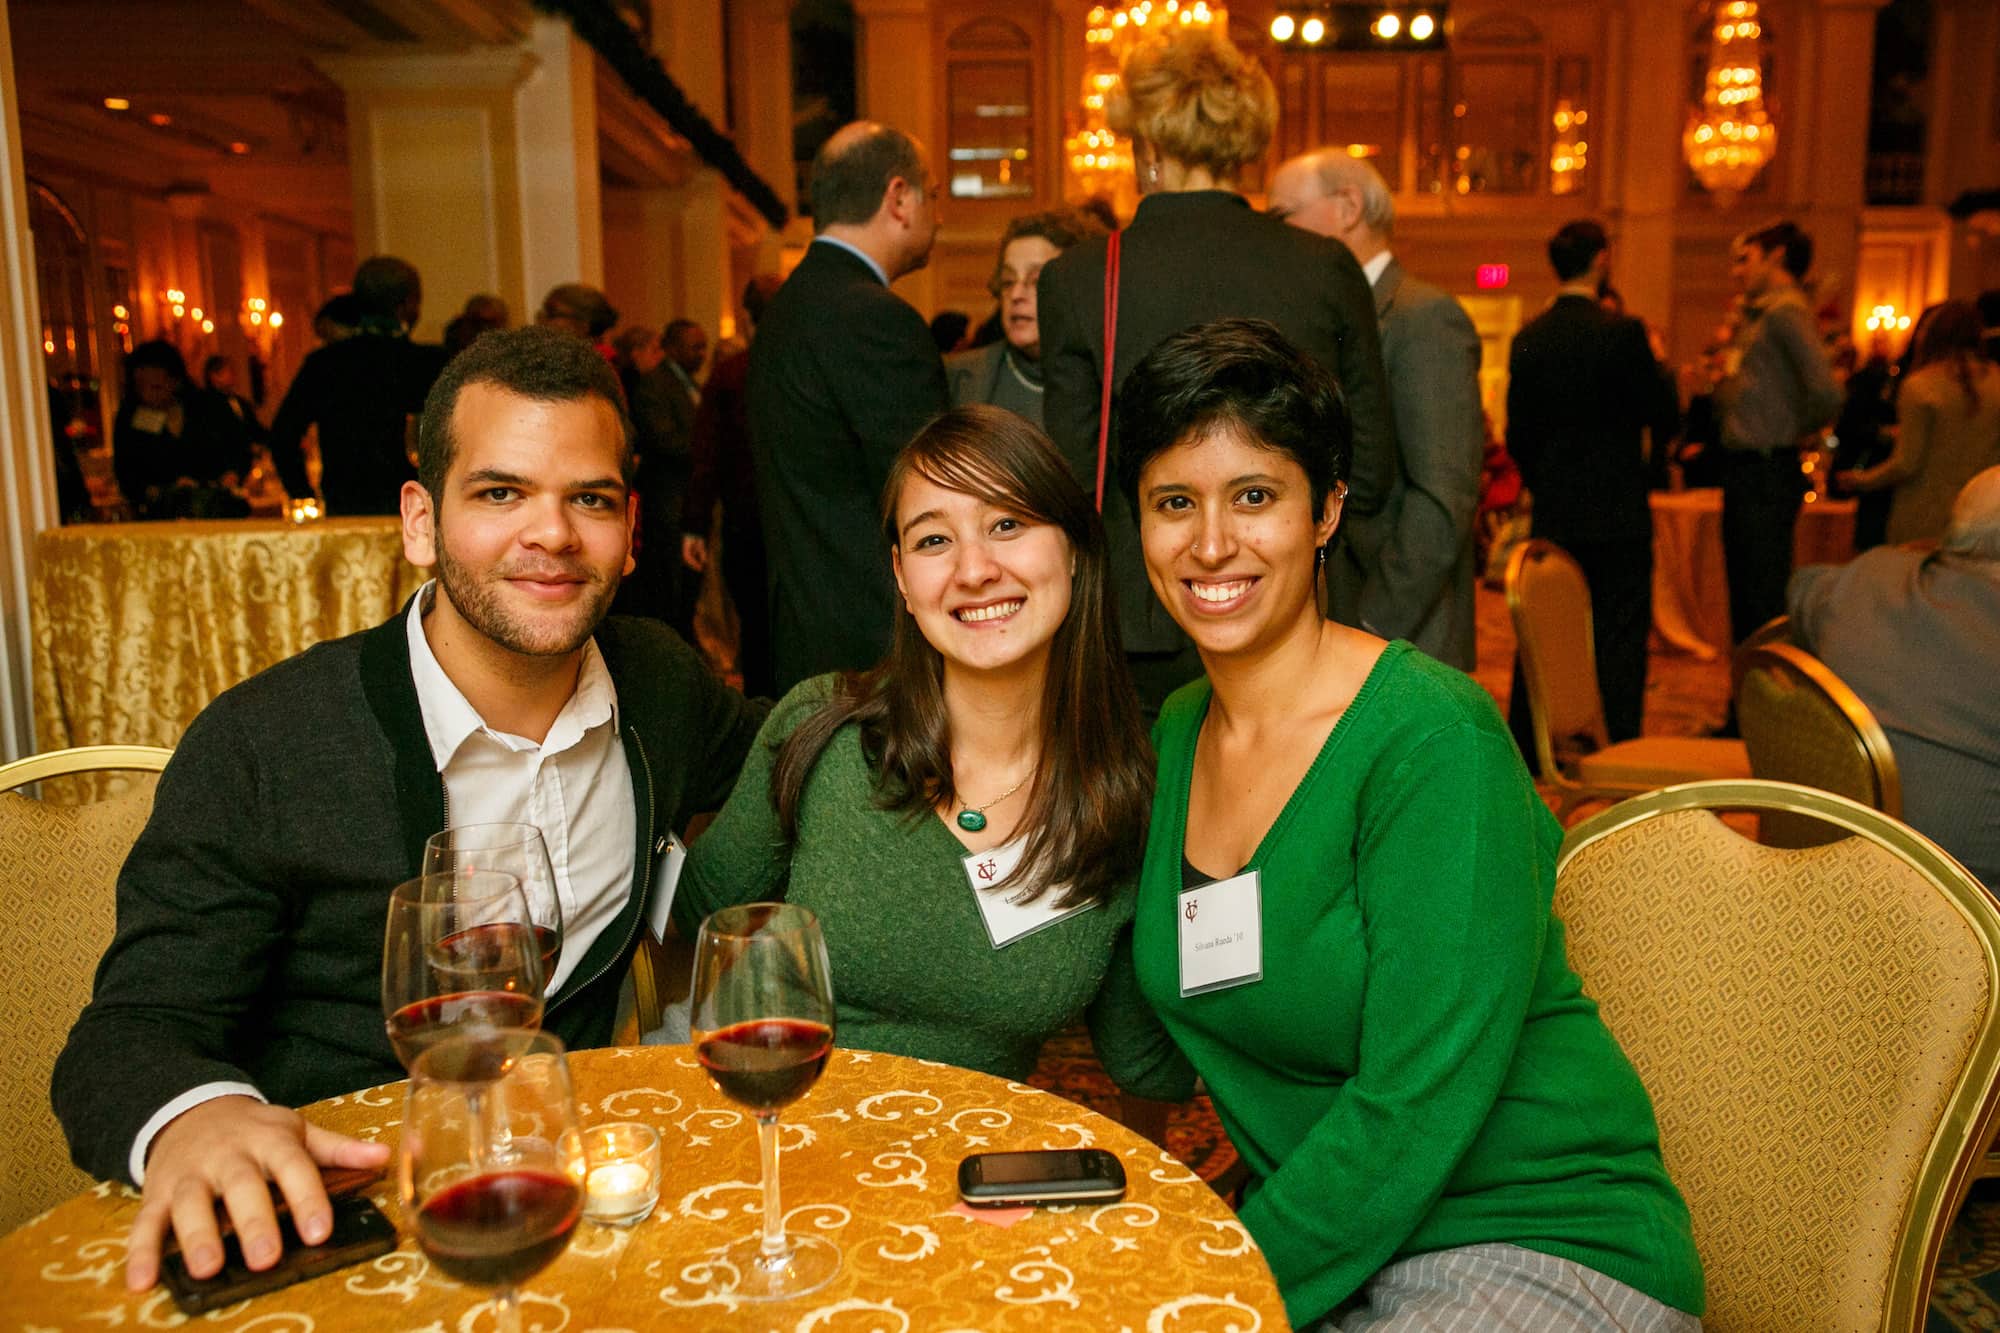 Three people at a dinner table smiling and leaning in for a photo